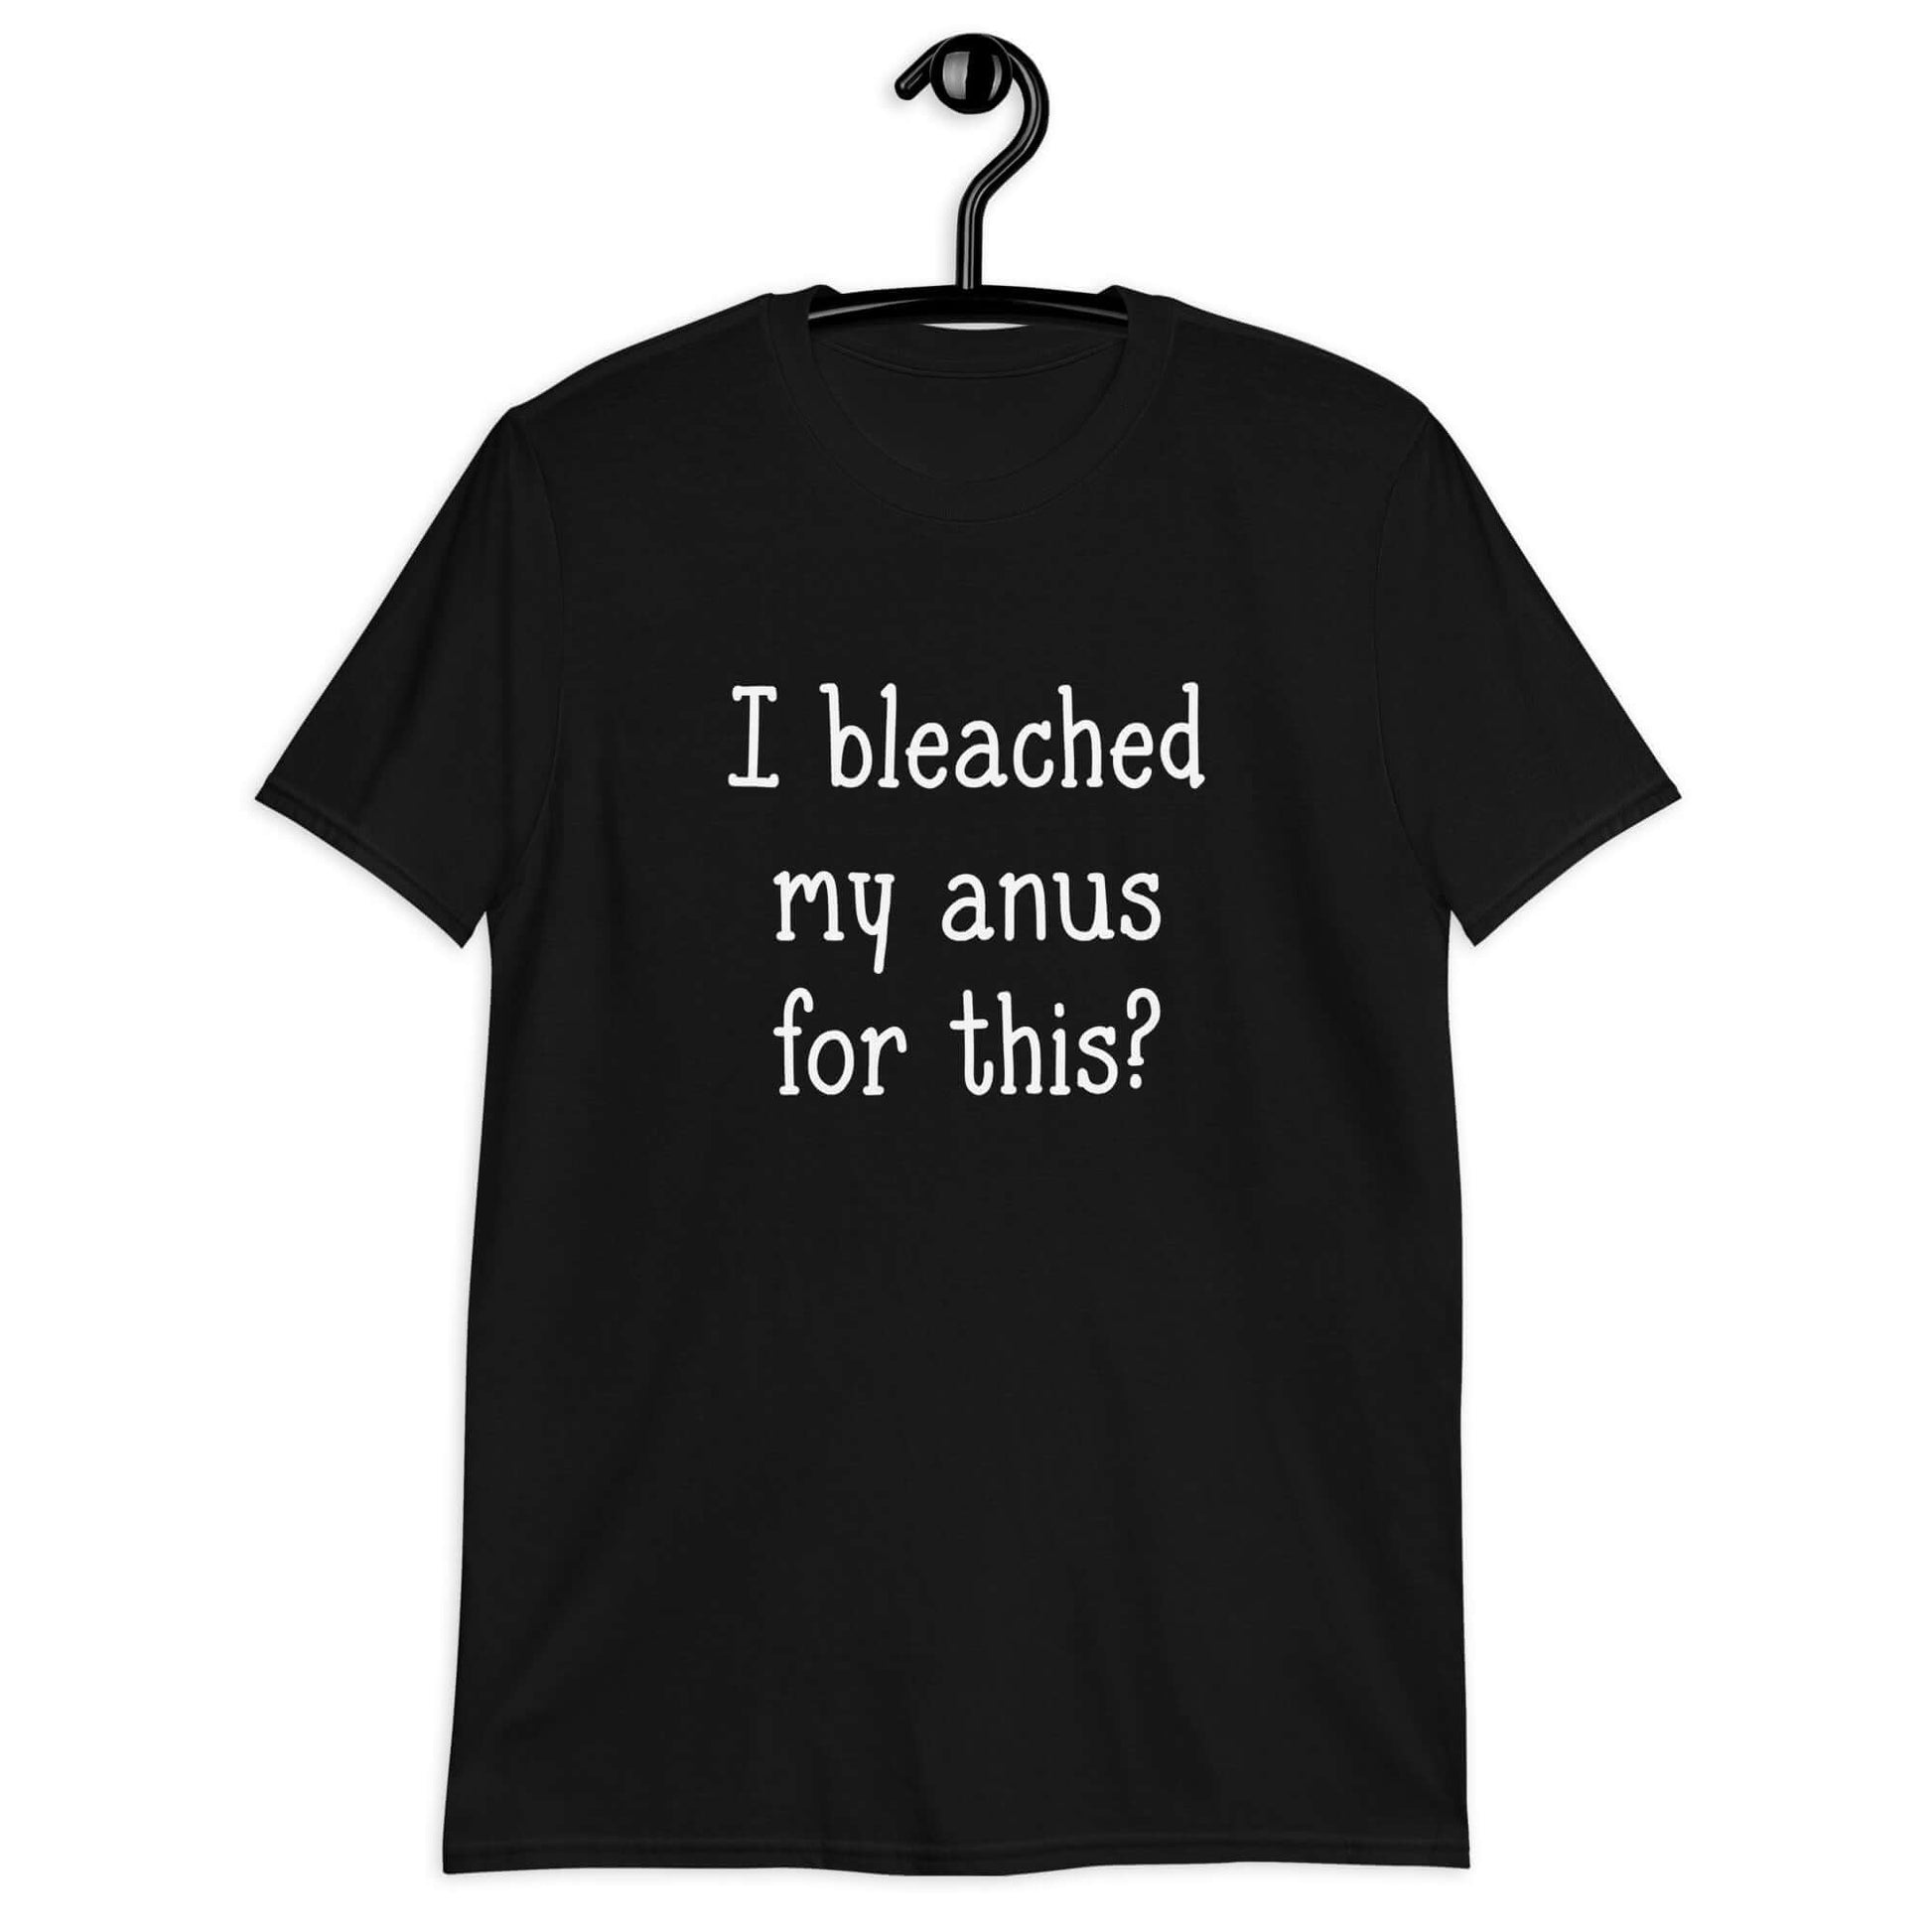 black t-shirt that has "I bleached my anus for this?" printed on the front